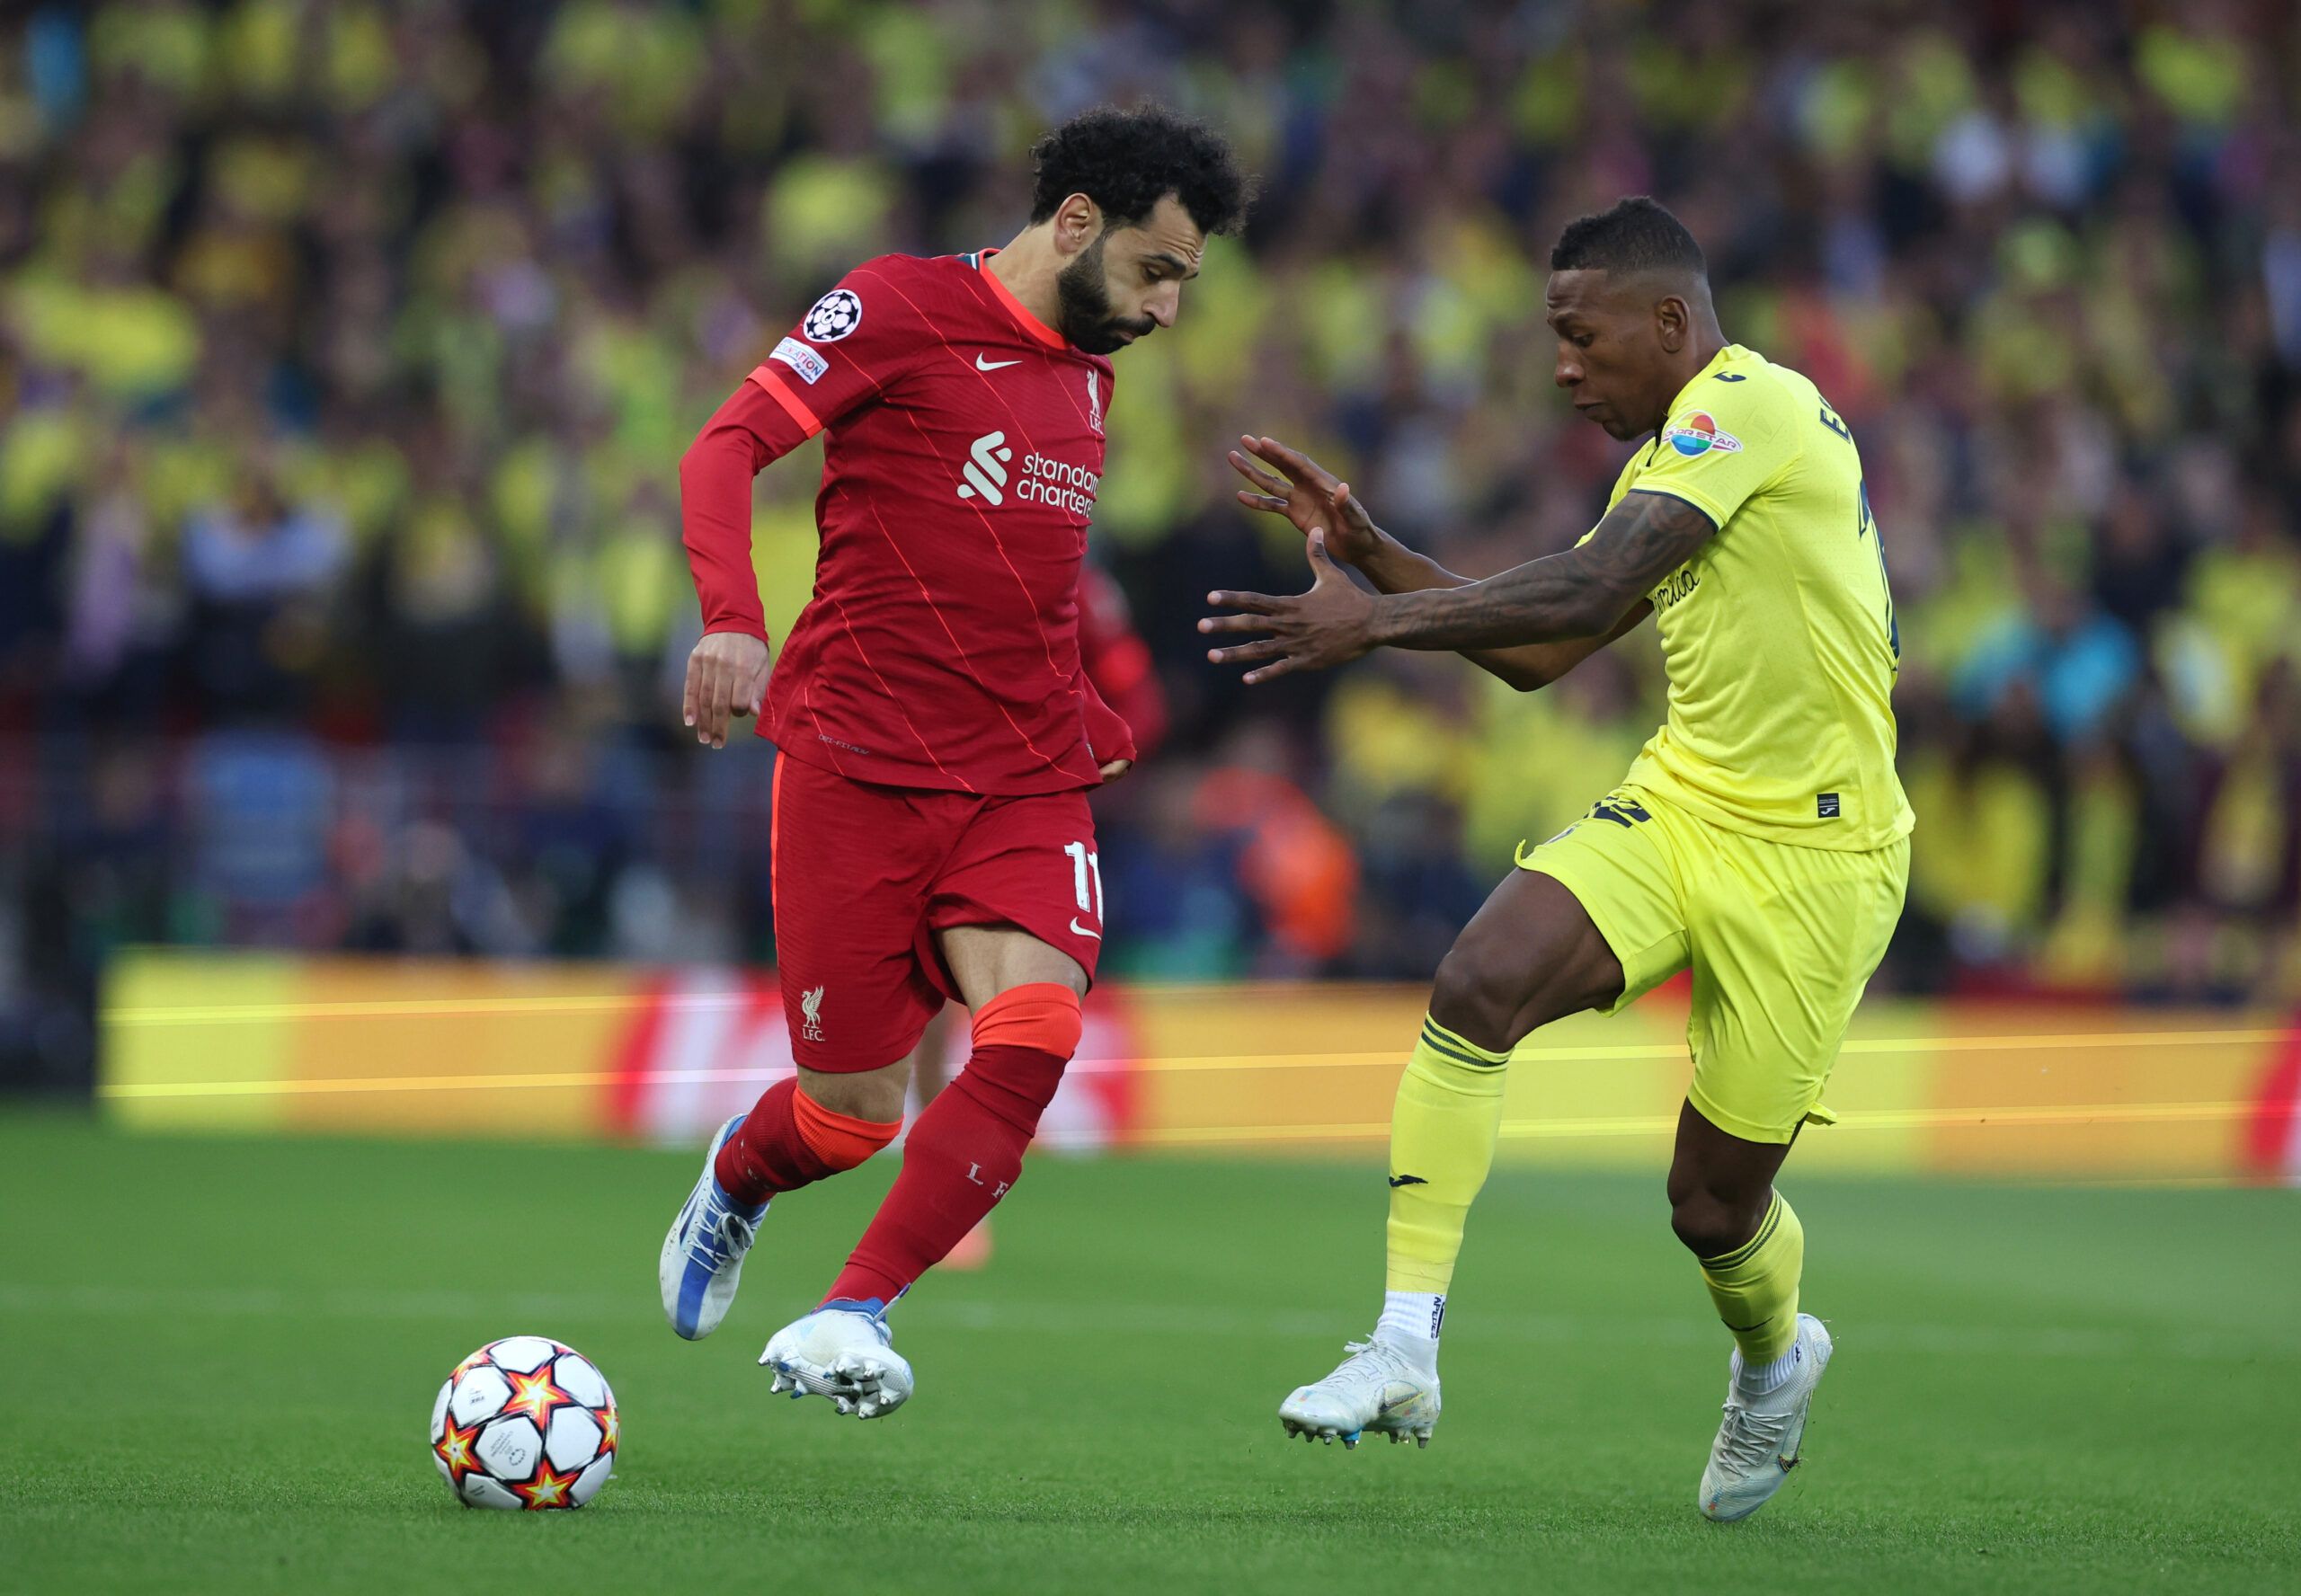 Soccer Football - Champions League - Semi Final - First Leg - Liverpool v Villarreal - Anfield, Liverpool, Britain - April 27, 2022 Liverpool's Mohamed Salah in action with Villarreal's Pervis Estupinan REUTERS/Phil Noble